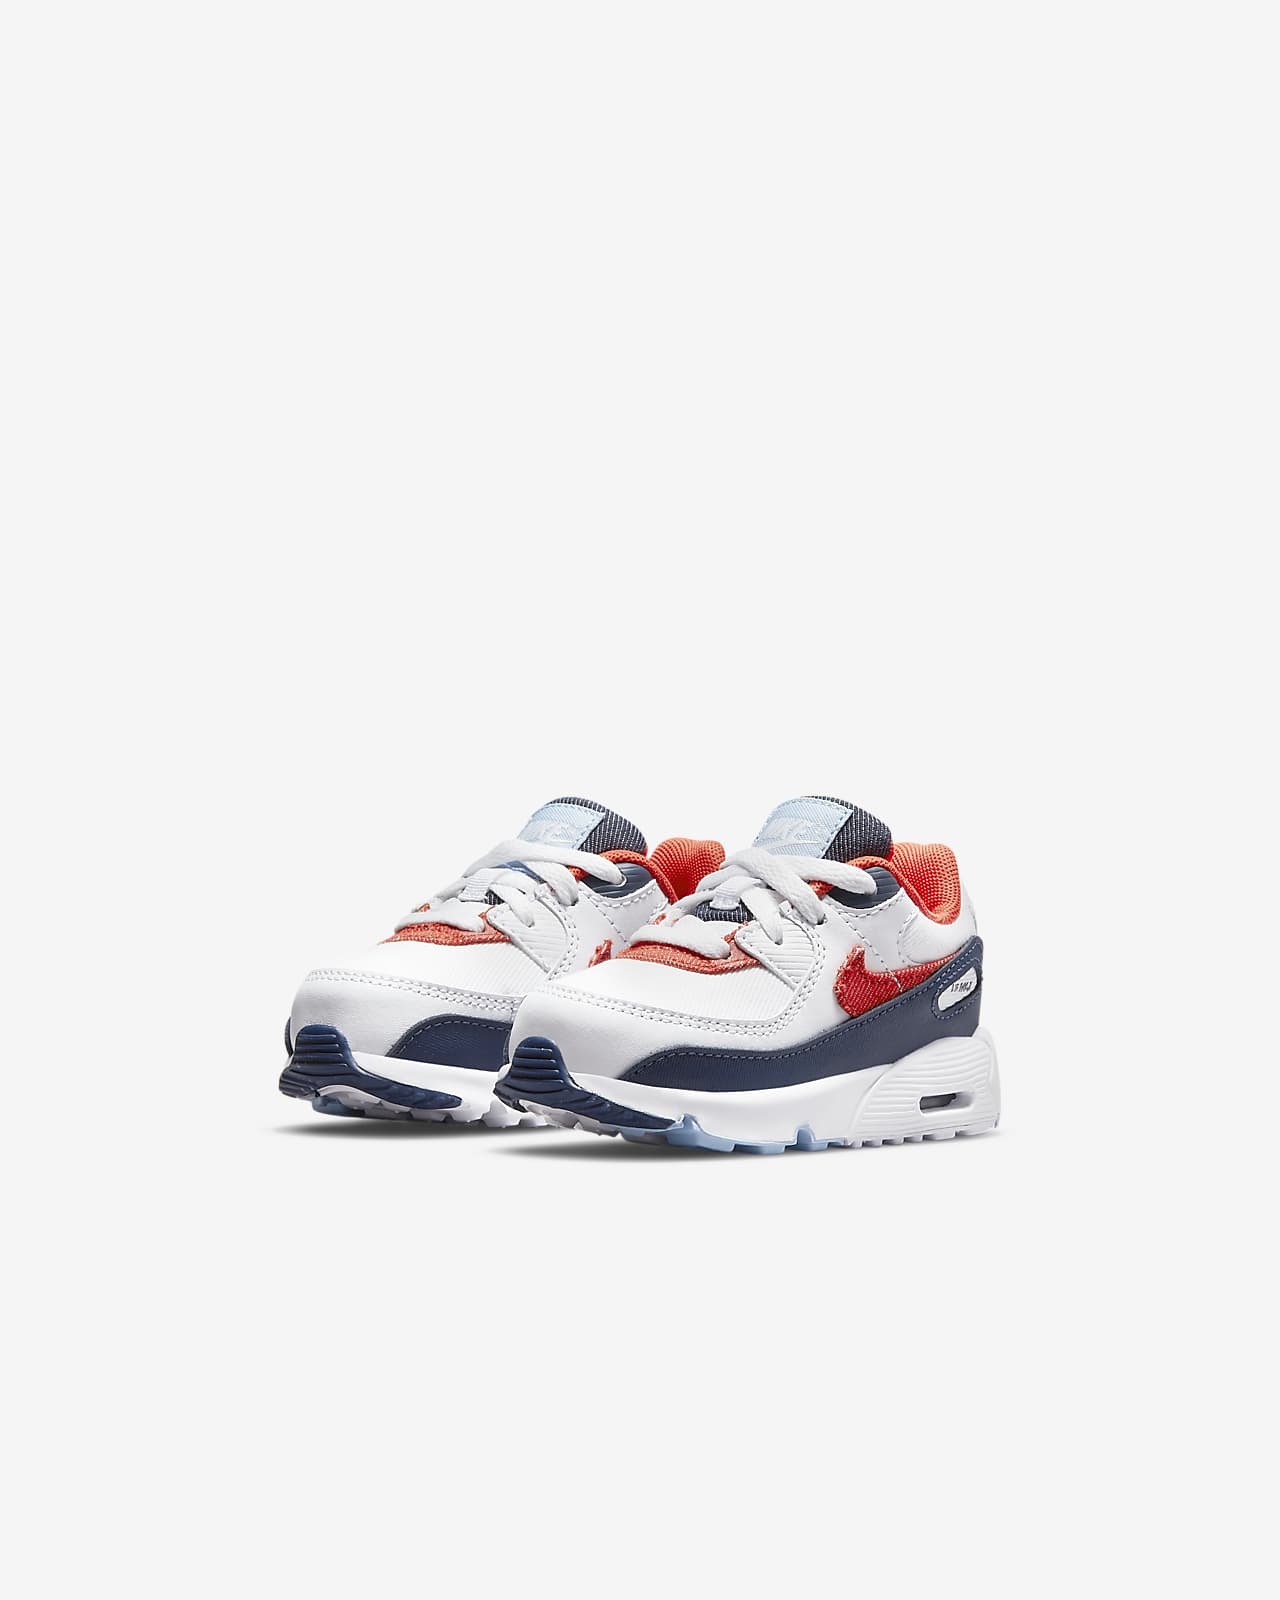 nike air max for little girls